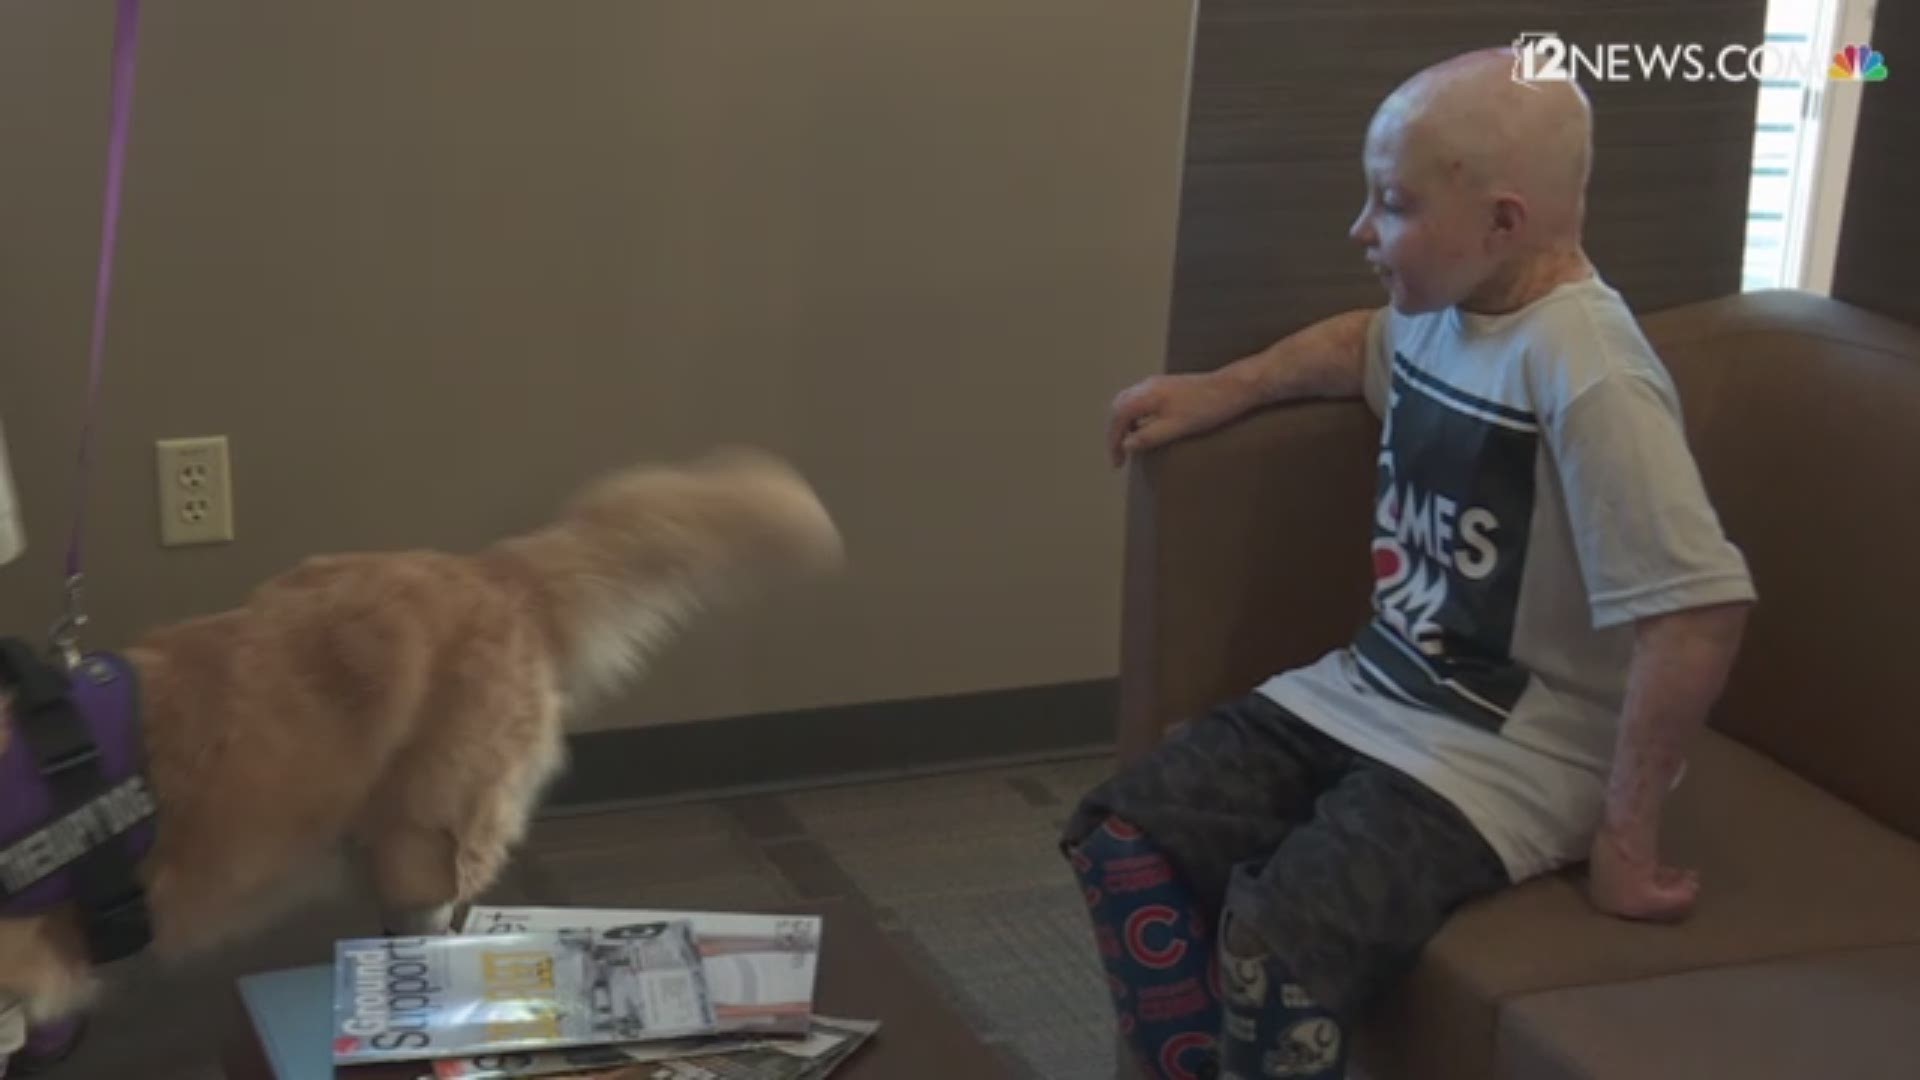 Owen Mahan and his family traveled hundreds of miles to meet prosthetic golden retriever therapy dog Chi Chi.